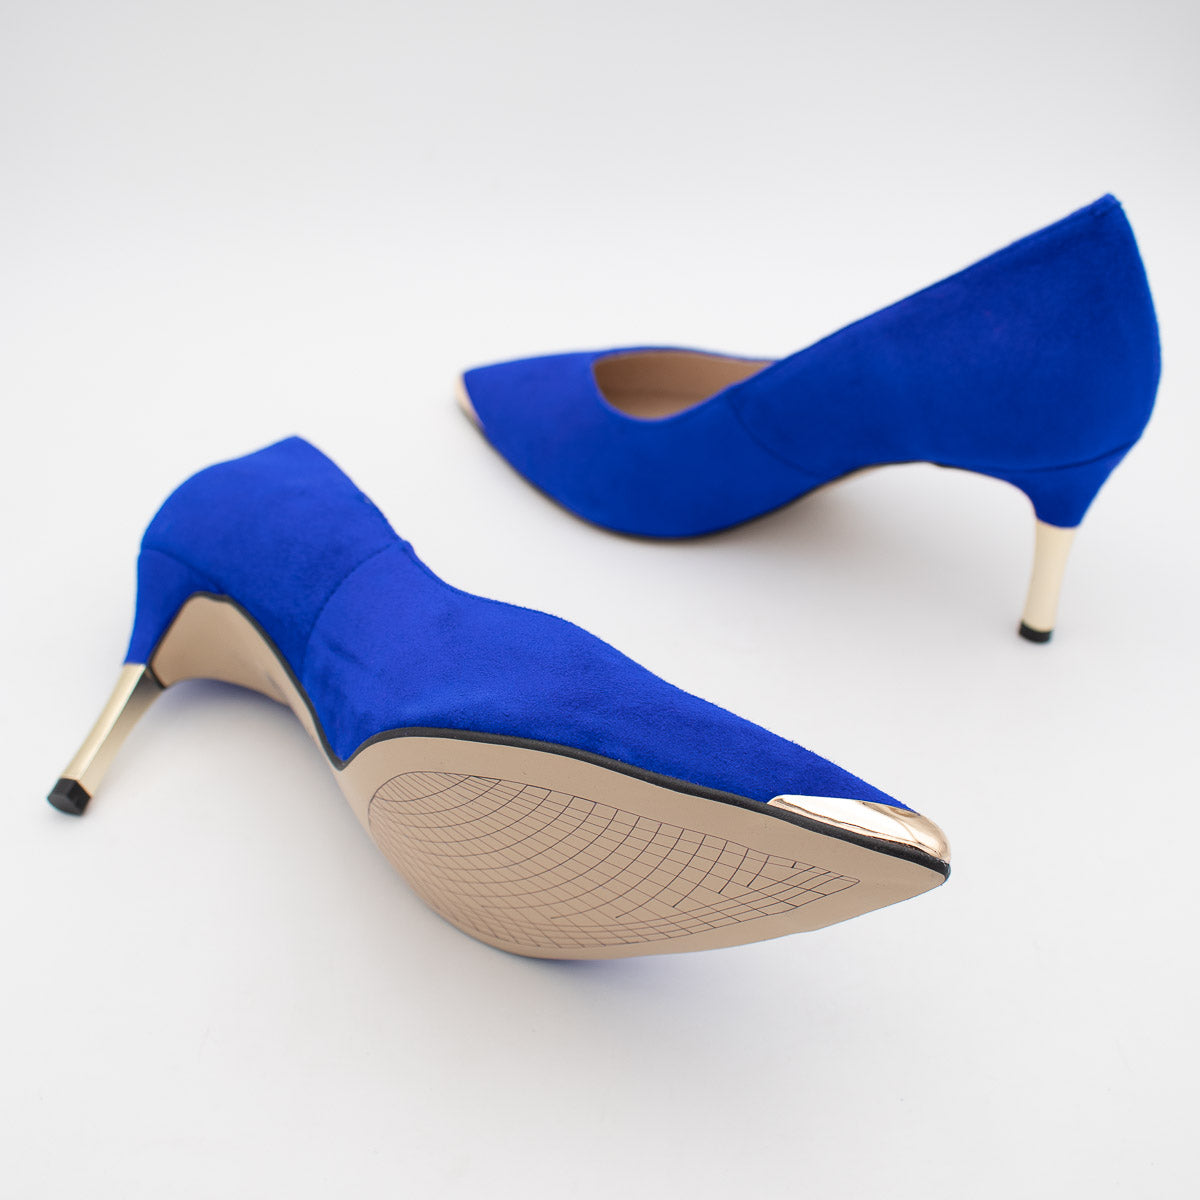 Strut Your Stuff in Style - Vibrant Royal Blue High Heels